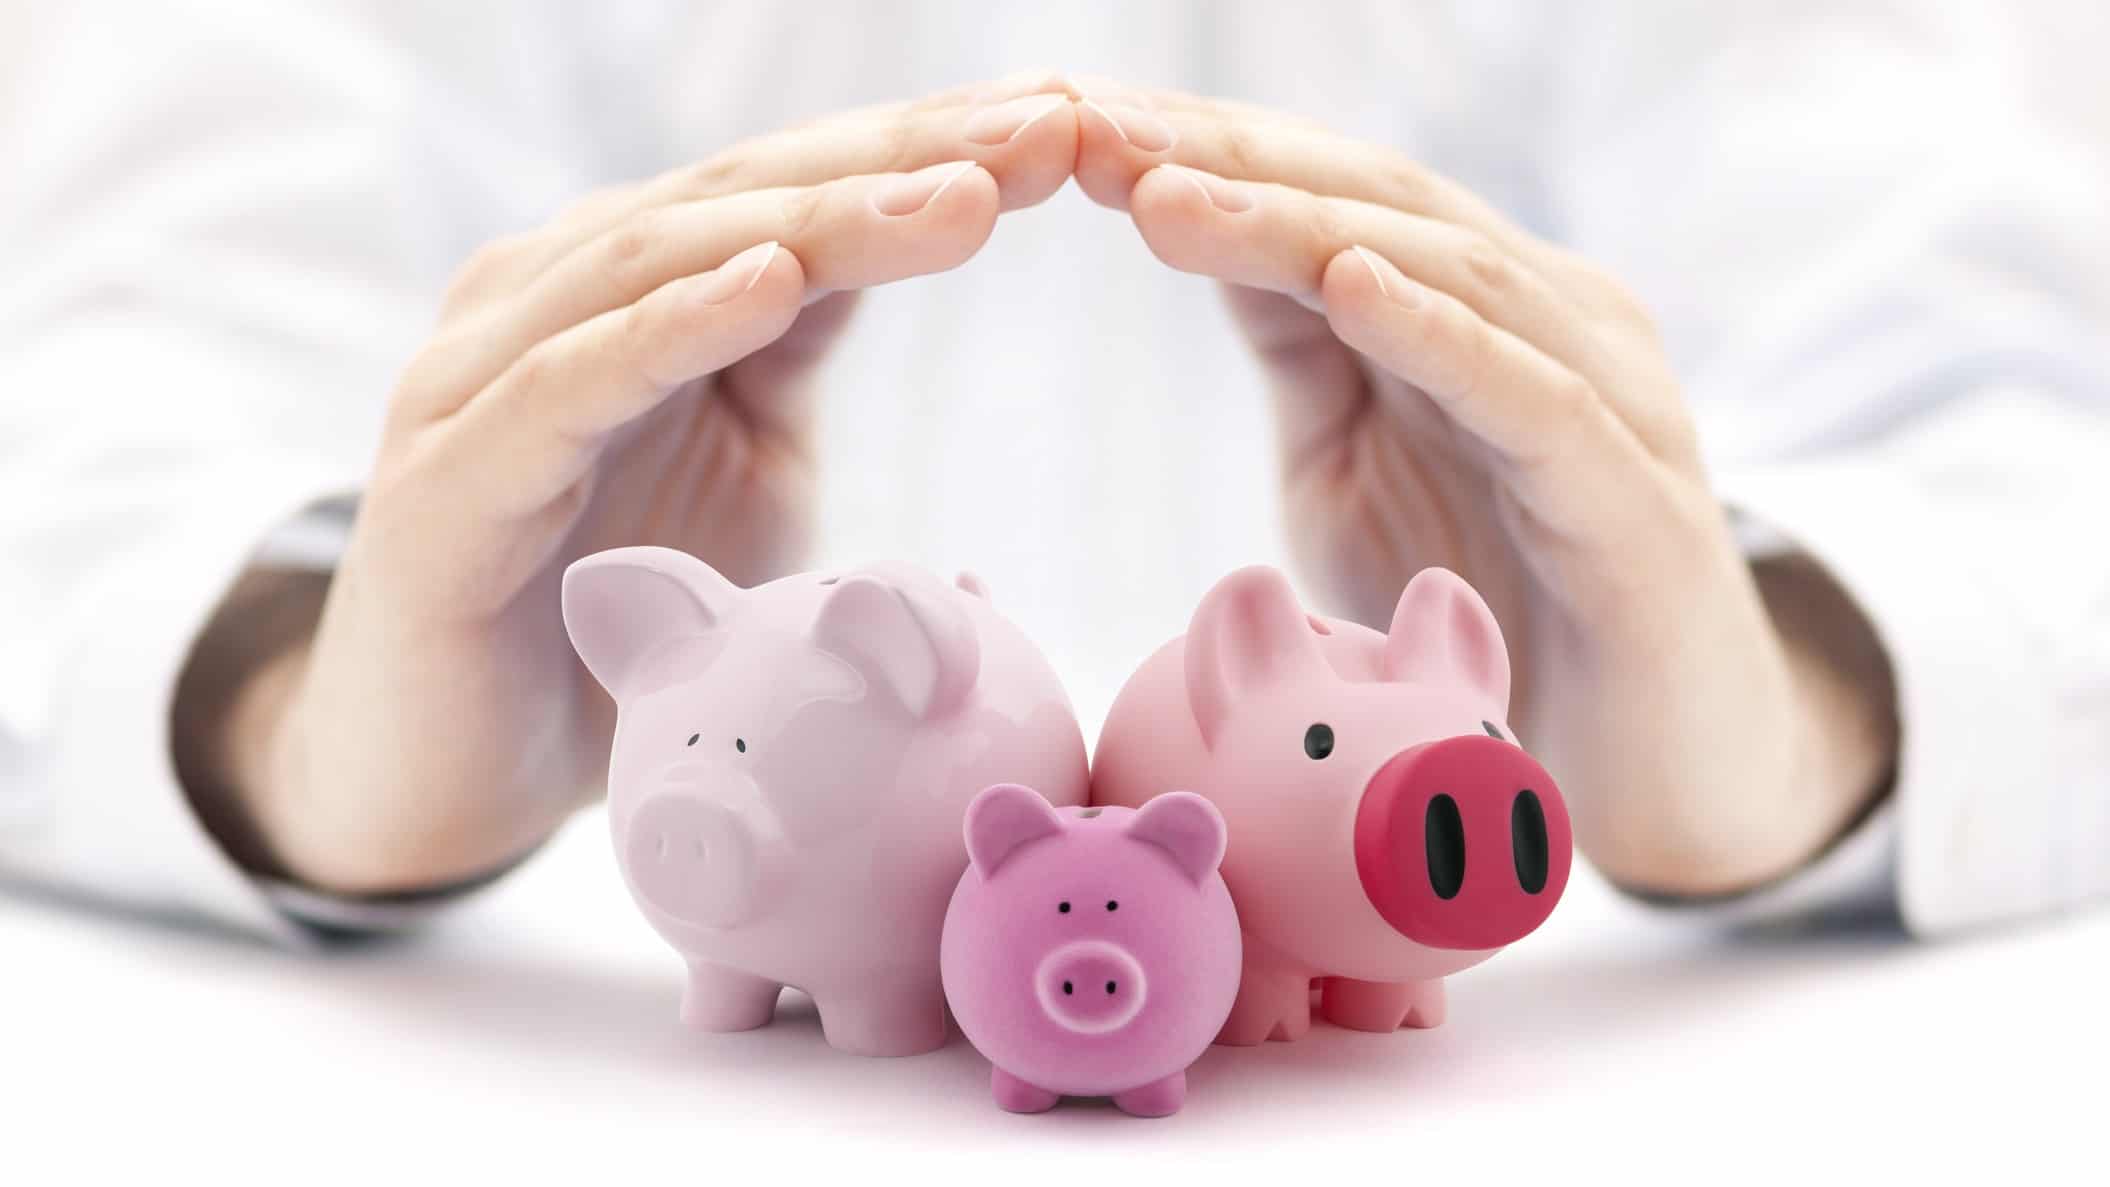 A person holds their hands over three piggy banks, protecting and shielding their money and investments.